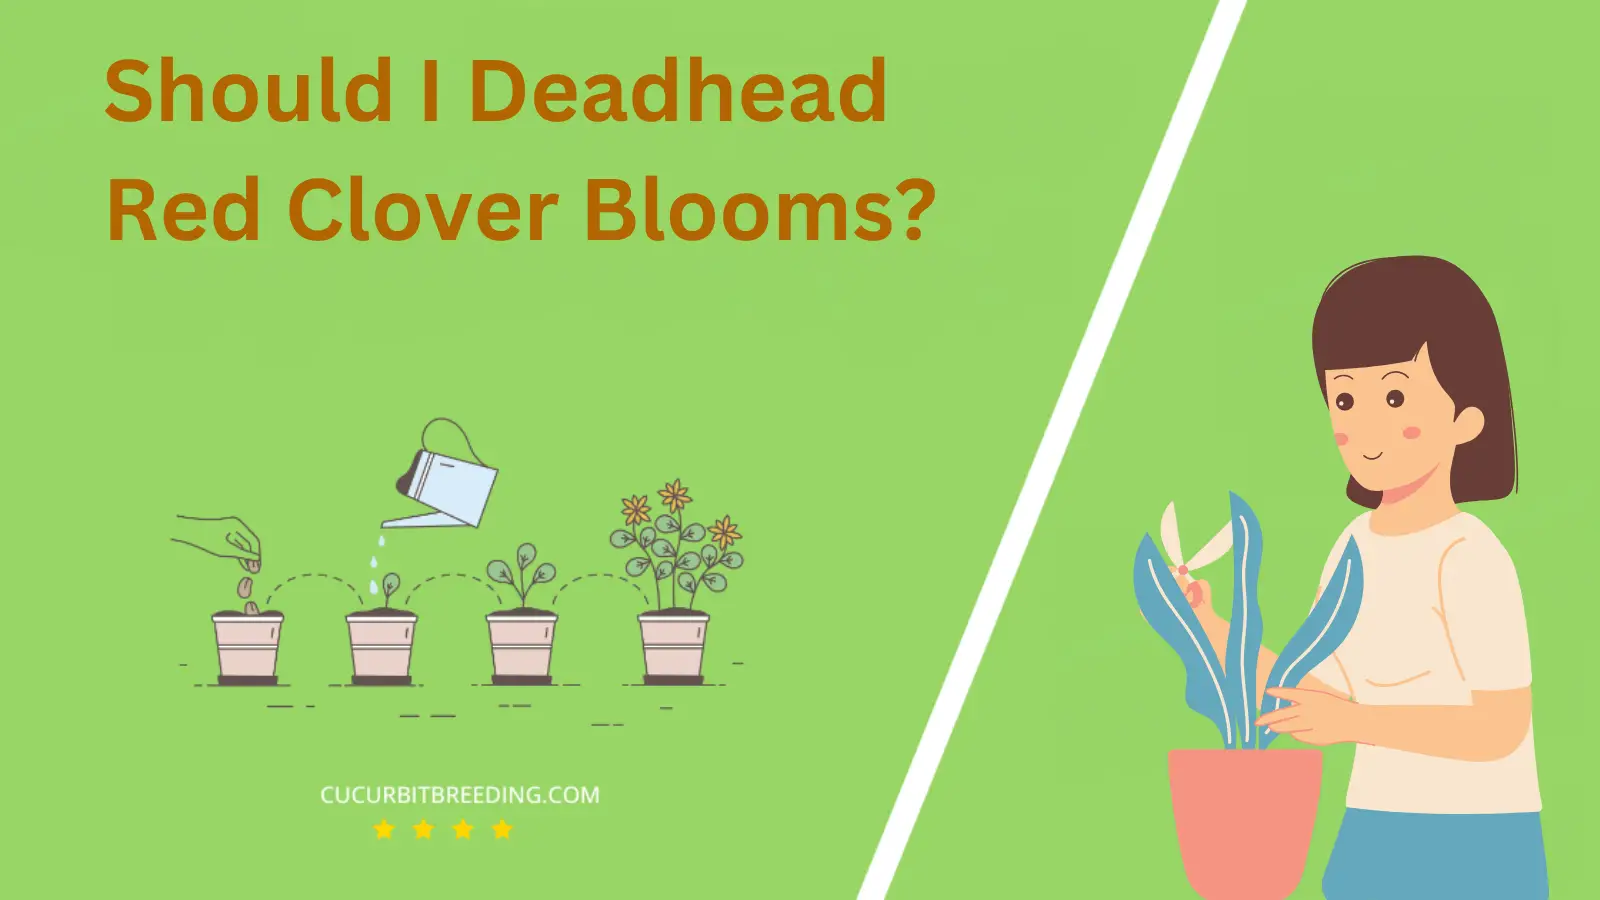 Should I Deadhead Red Clover Blooms?